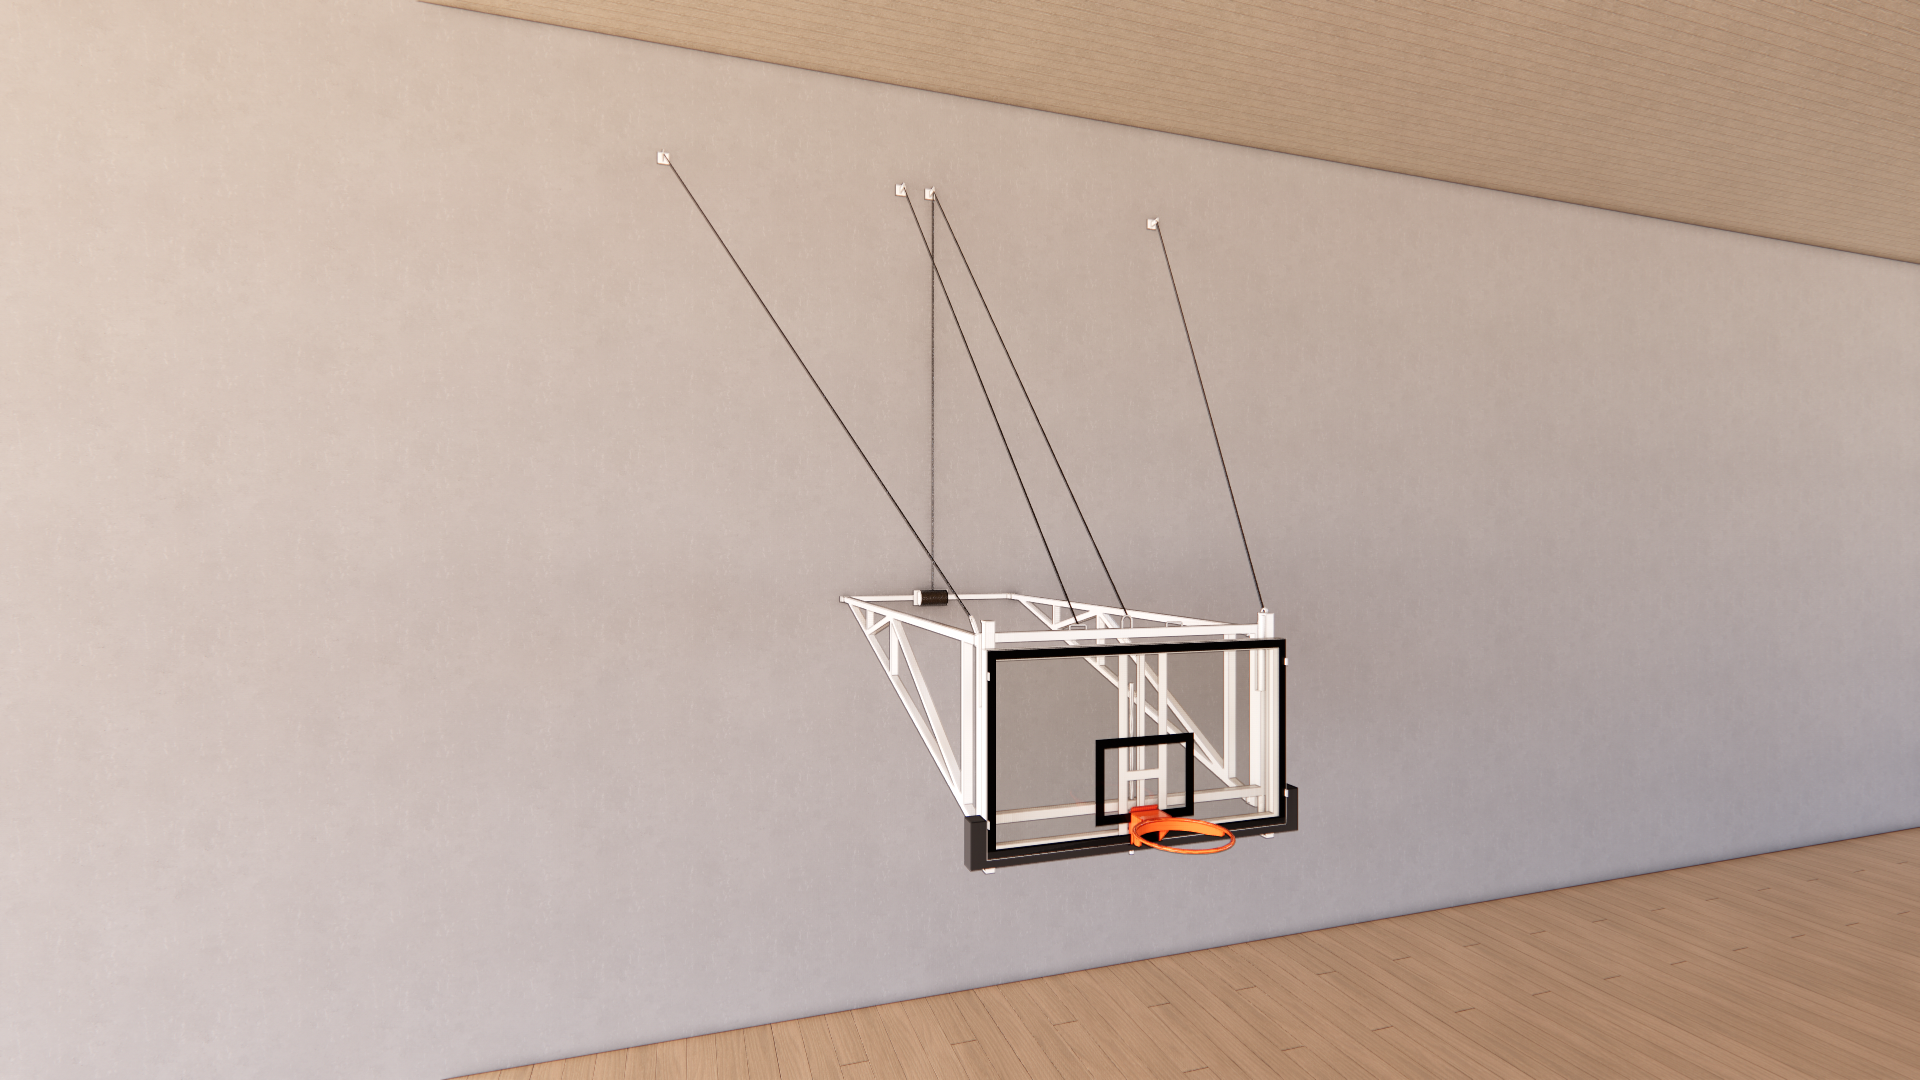 A Revit model of a wall-hung Gymleader basketball hoop in a gym 